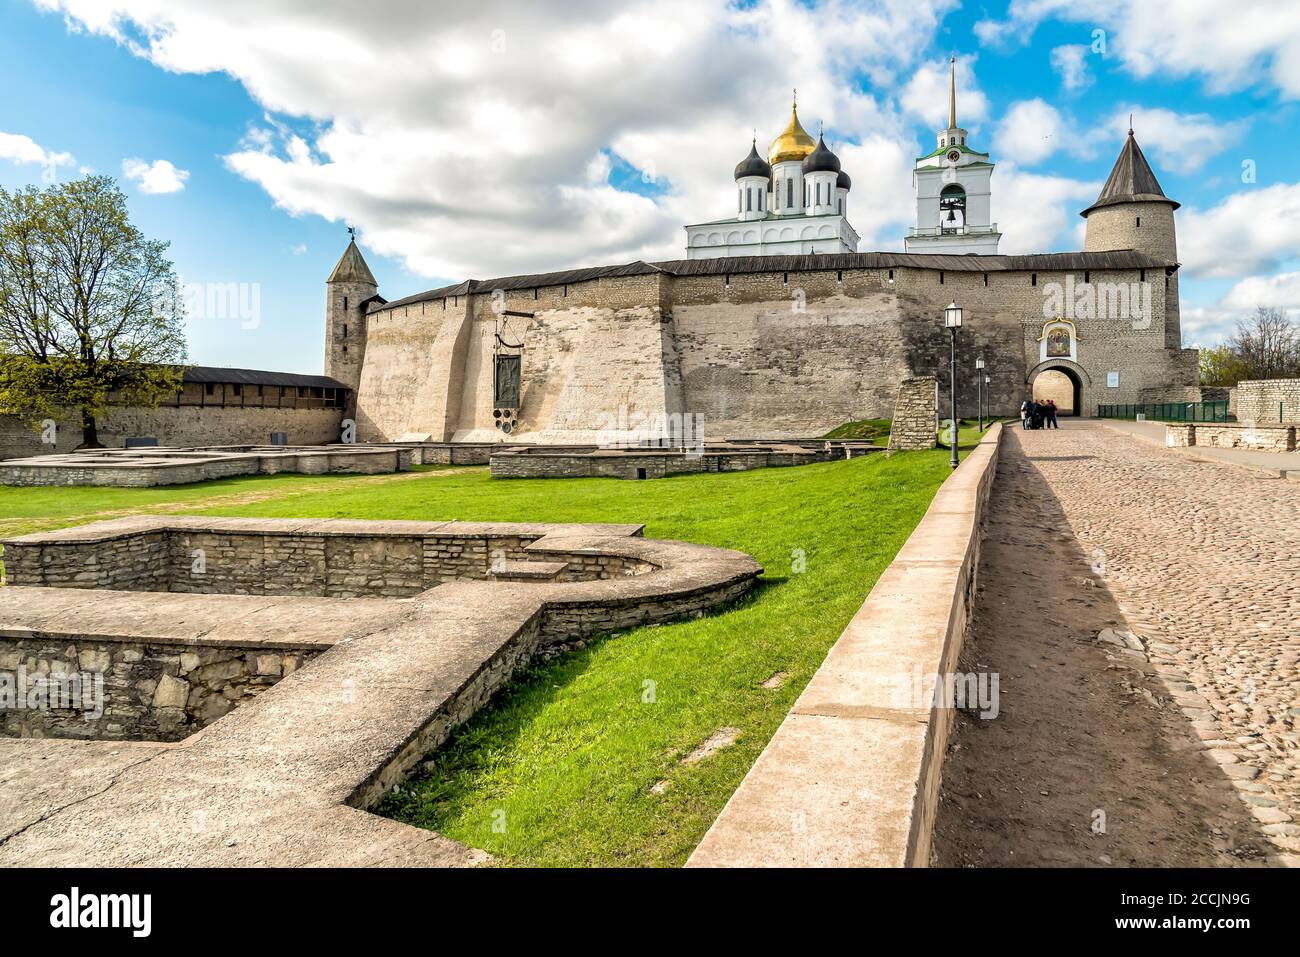 View of the Pskov Krom or Pskov Kremlin in the central part of the city, Russia Stock Photo